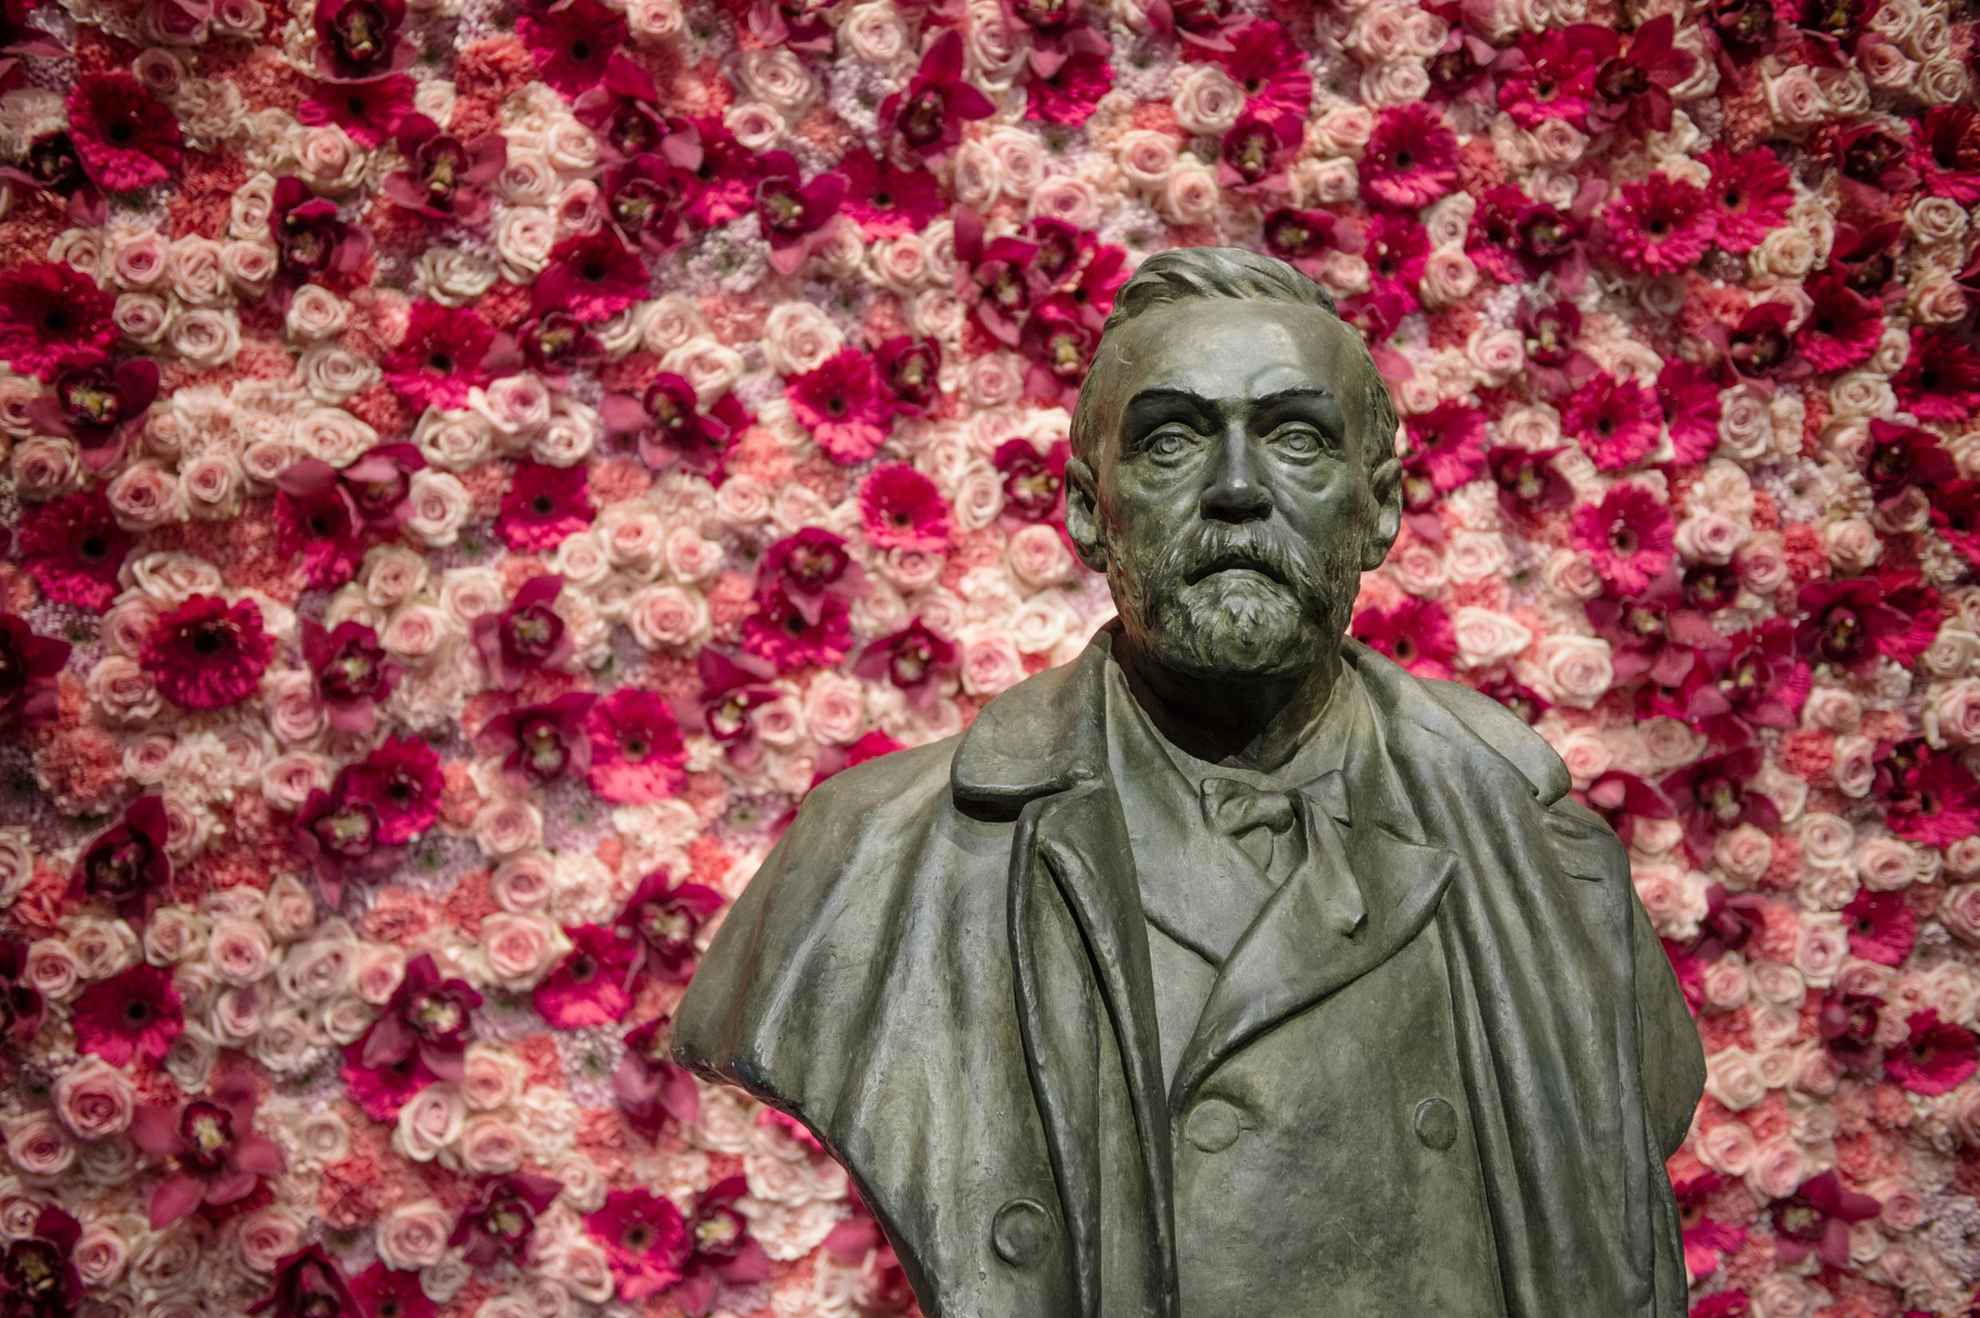 A statue of Alfred Nobel in front of a wall decorated by pink and white flowers.